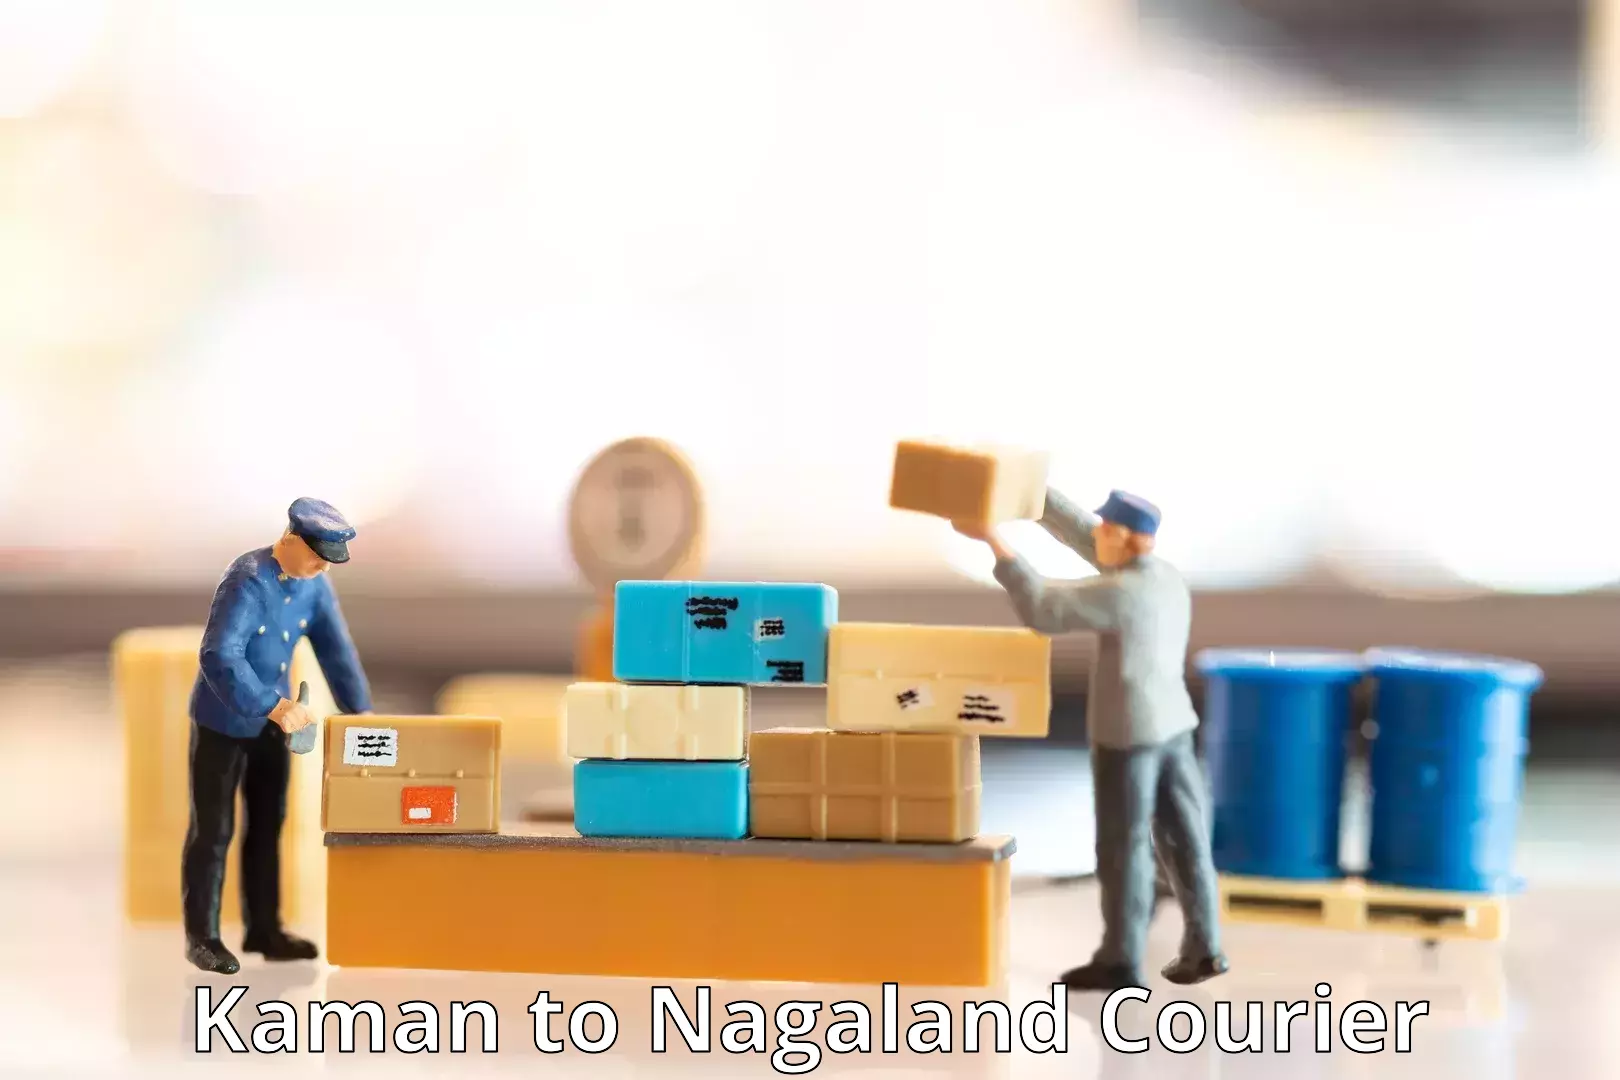 Flexible delivery scheduling in Kaman to Nagaland